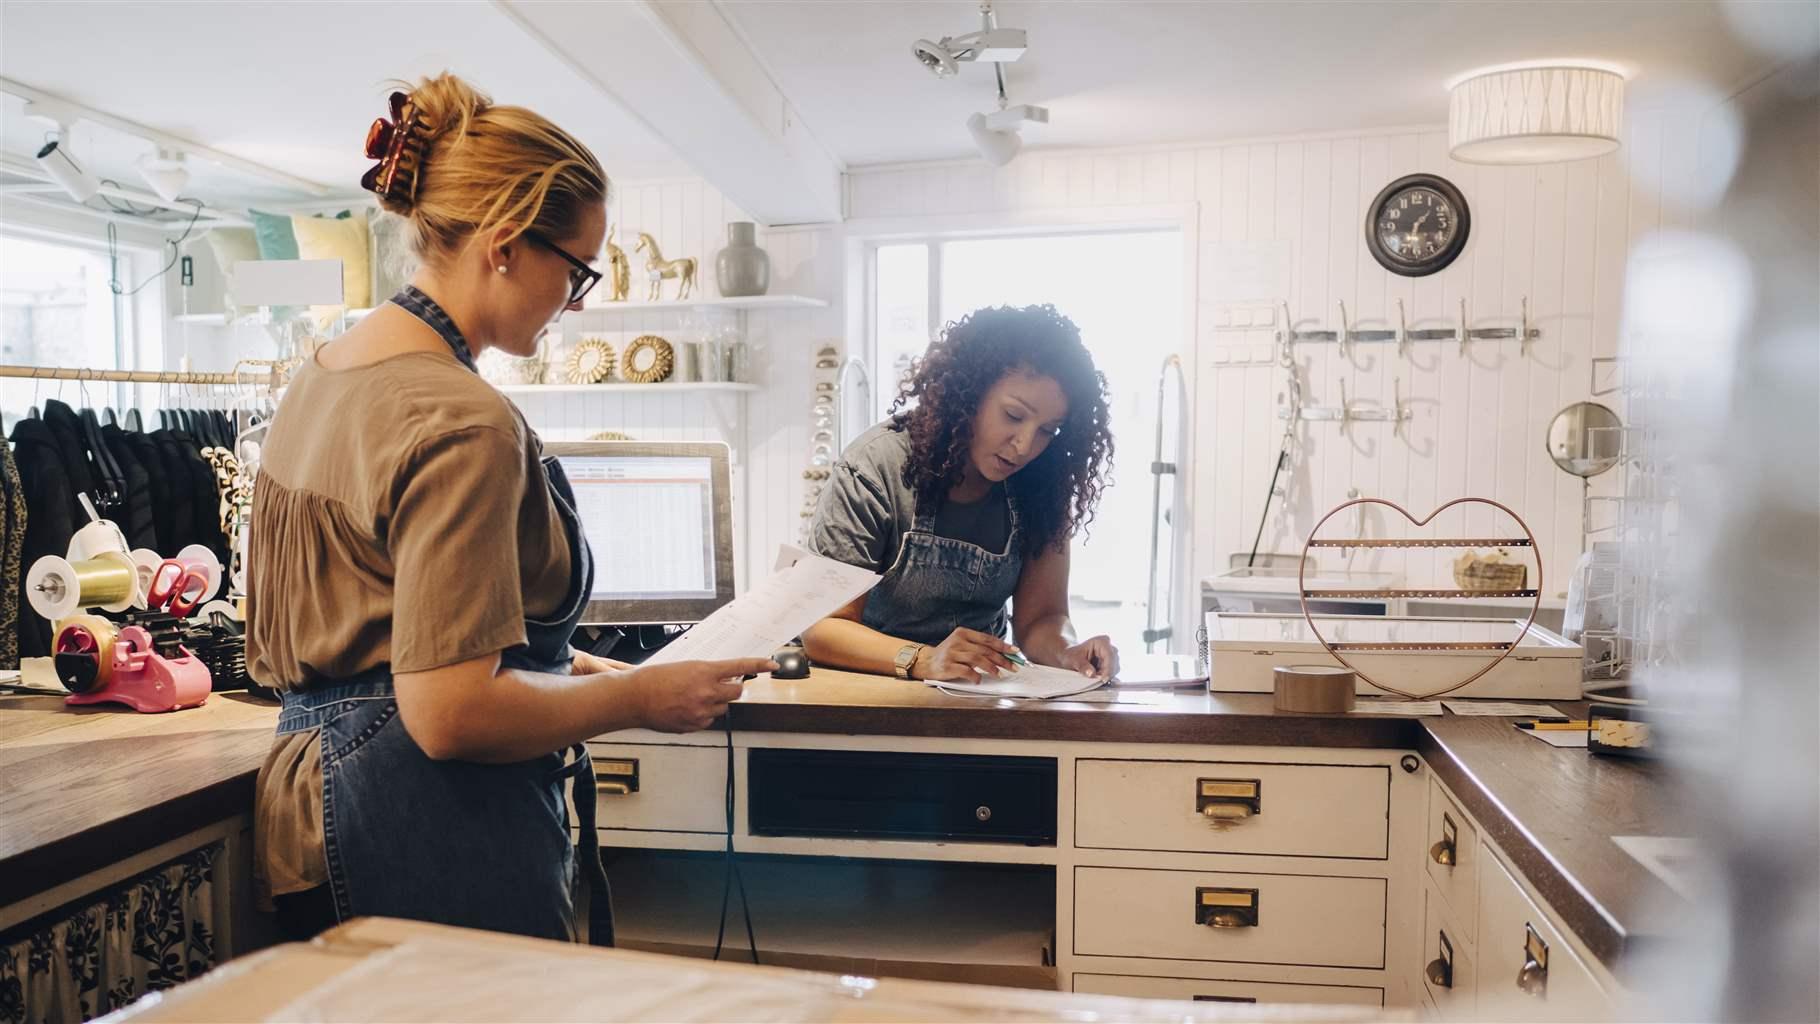 Two women wearing aprons go through paperwork together in a small shop.